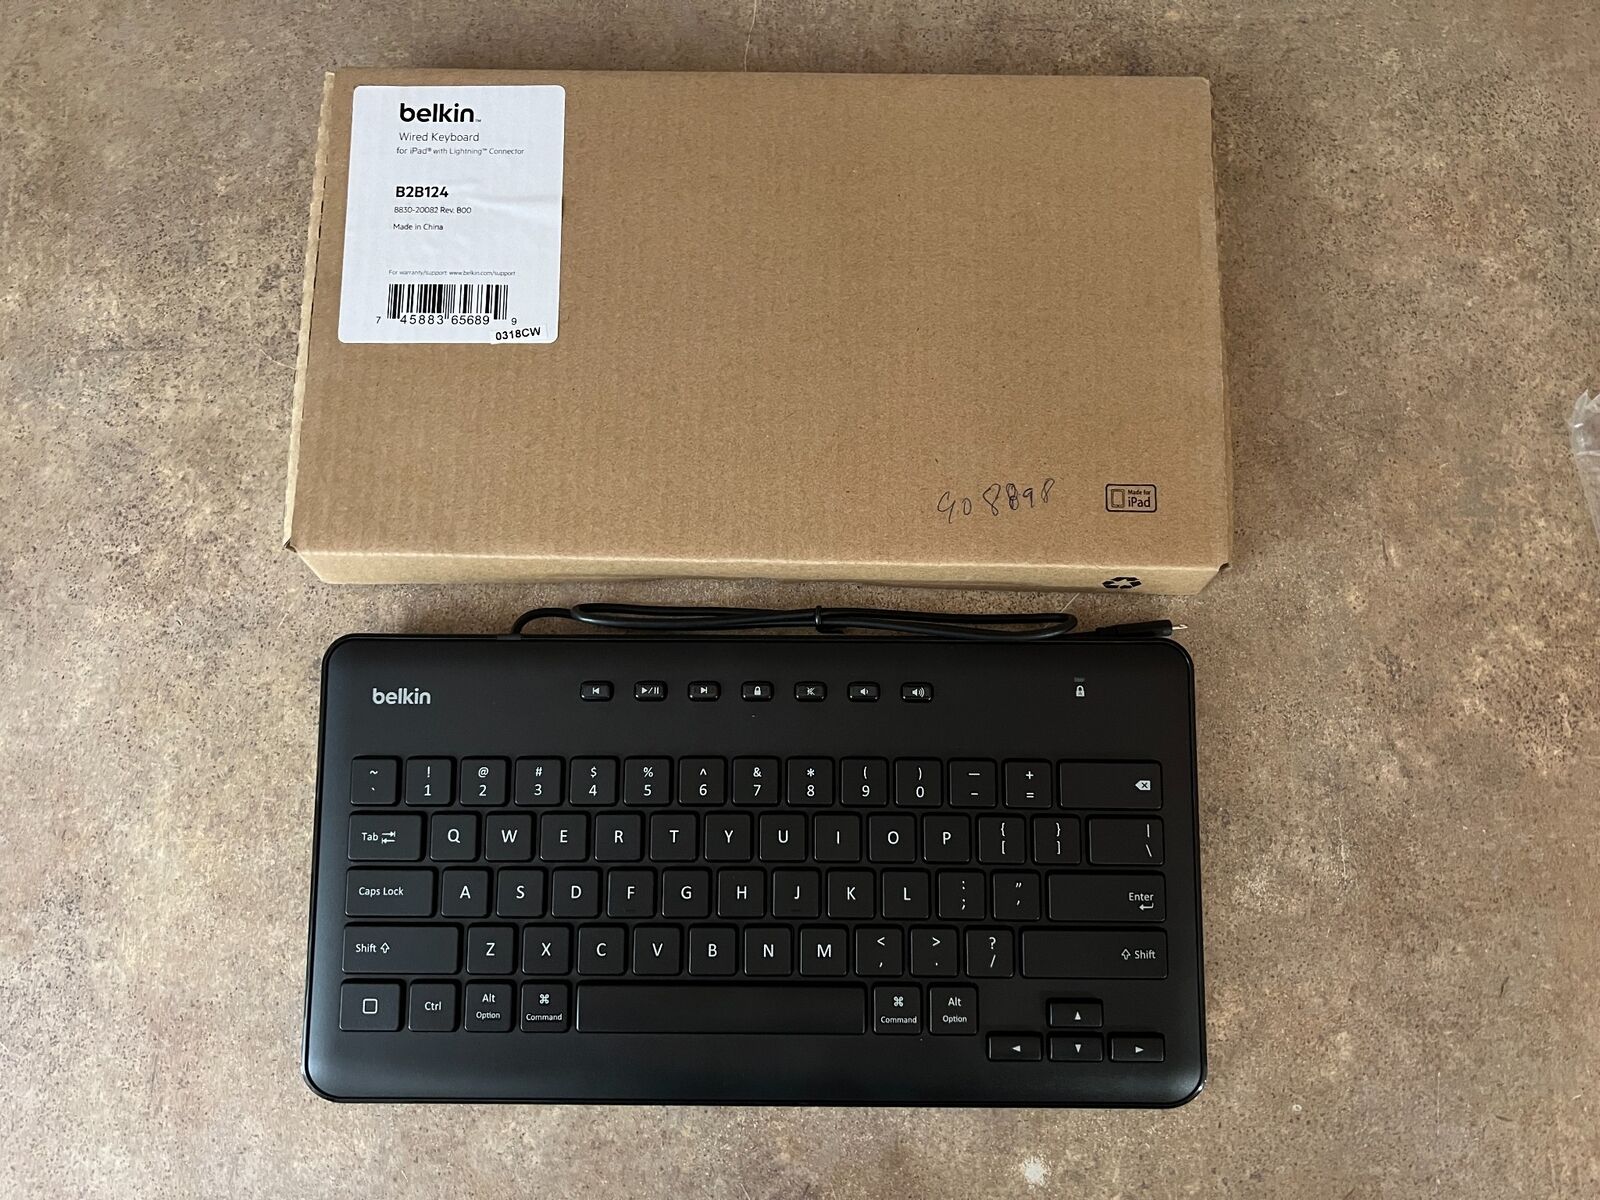 Belkin B2B124 Keyboard for iPad & iPhone with Lightning Connector DRF3-8w